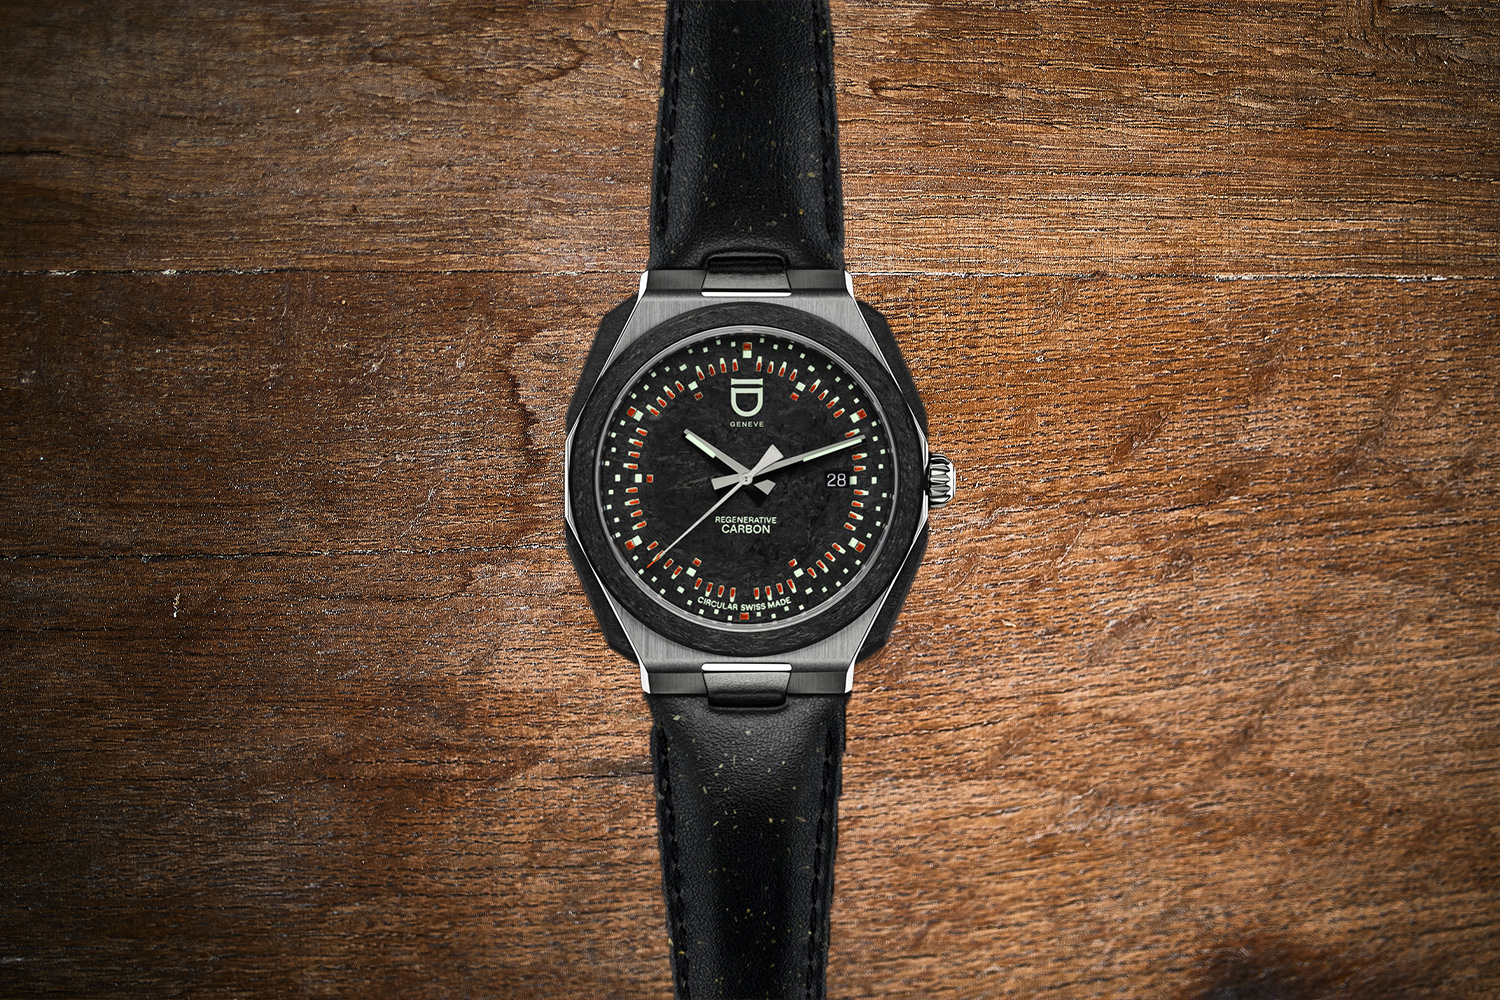 Front view of a sporty men's watch with a circular dial on Craiyon